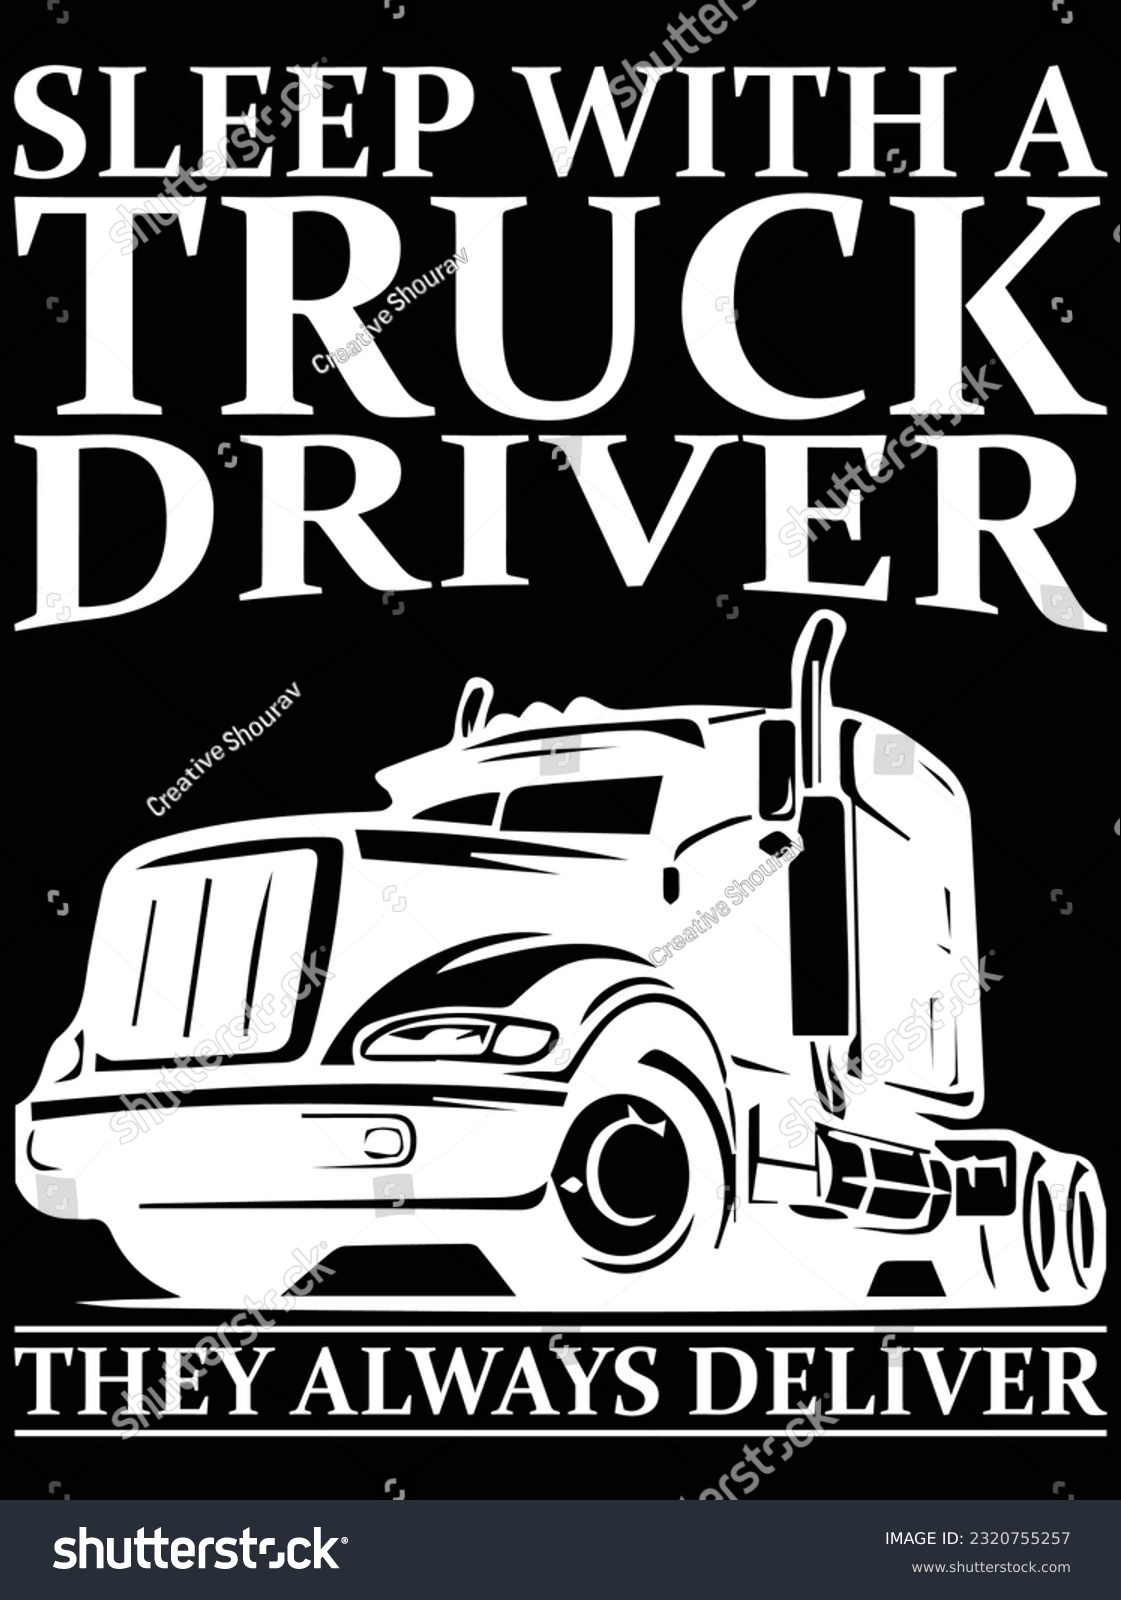 SVG of Sleep with a truck driver they always deliver vector art design, eps file. design file for t-shirt. SVG, EPS cuttable design file svg